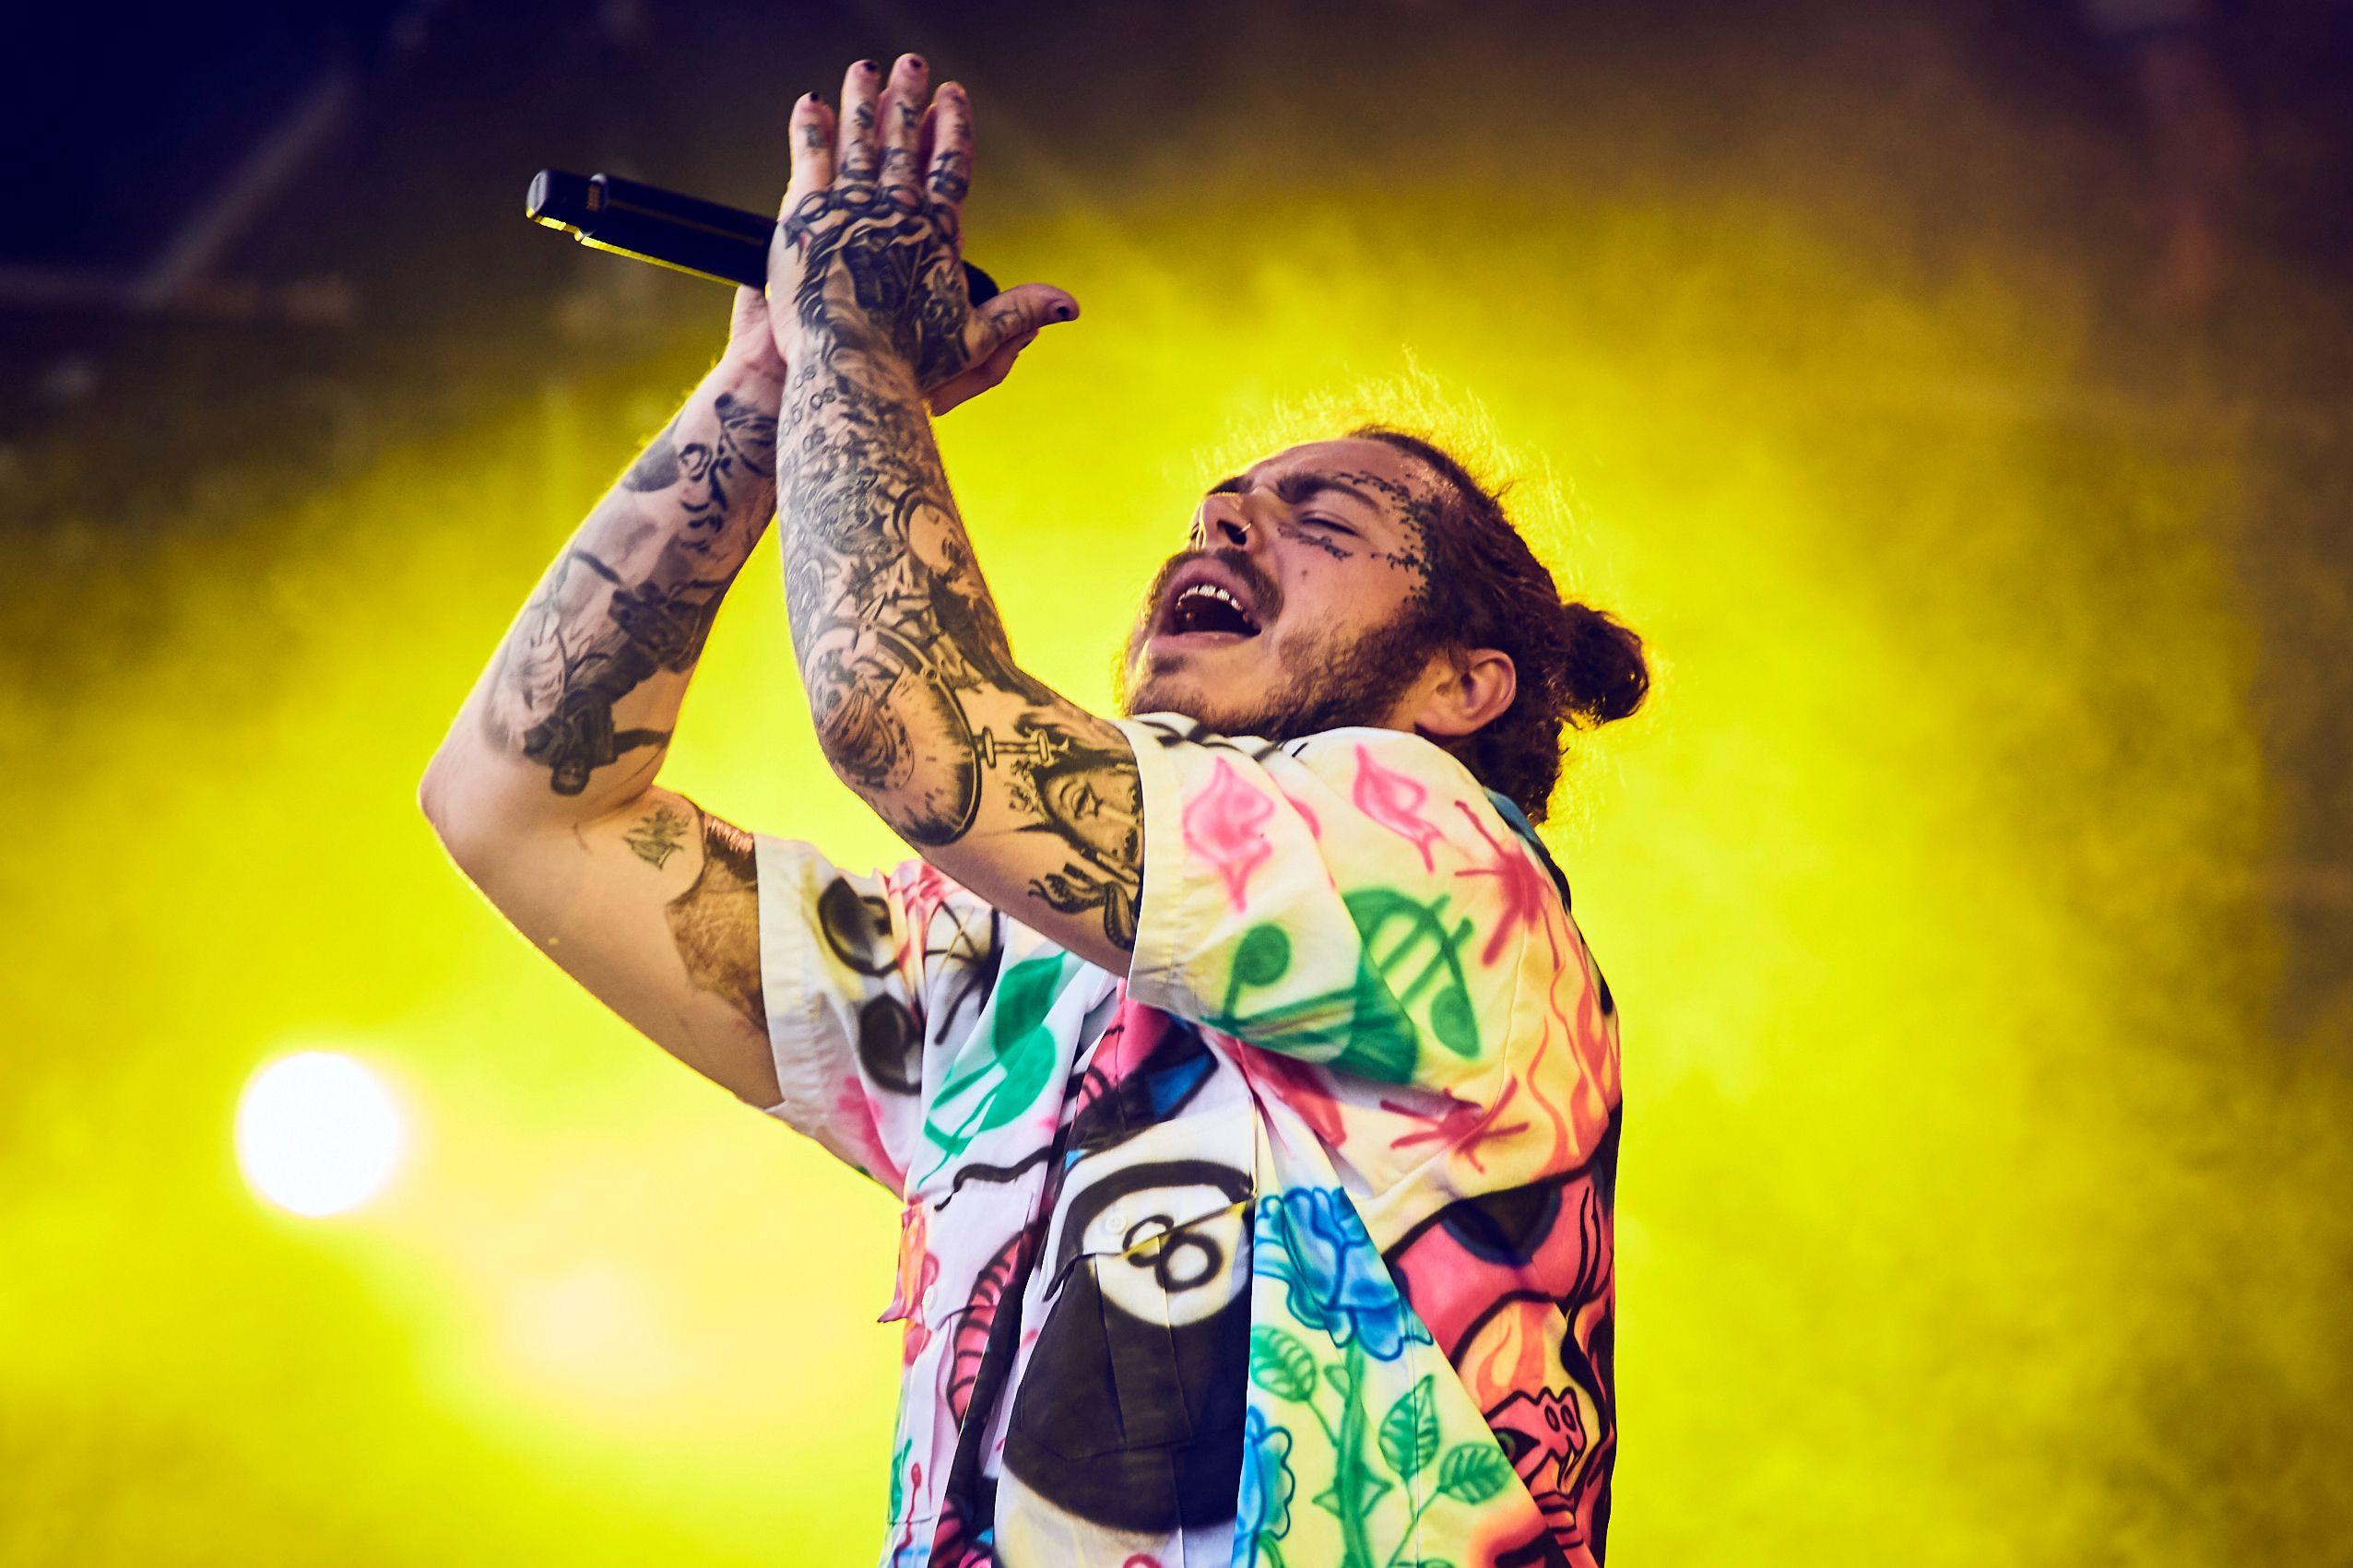 Post Malone Computer 2019 Wallpapers - Wallpaper Cave